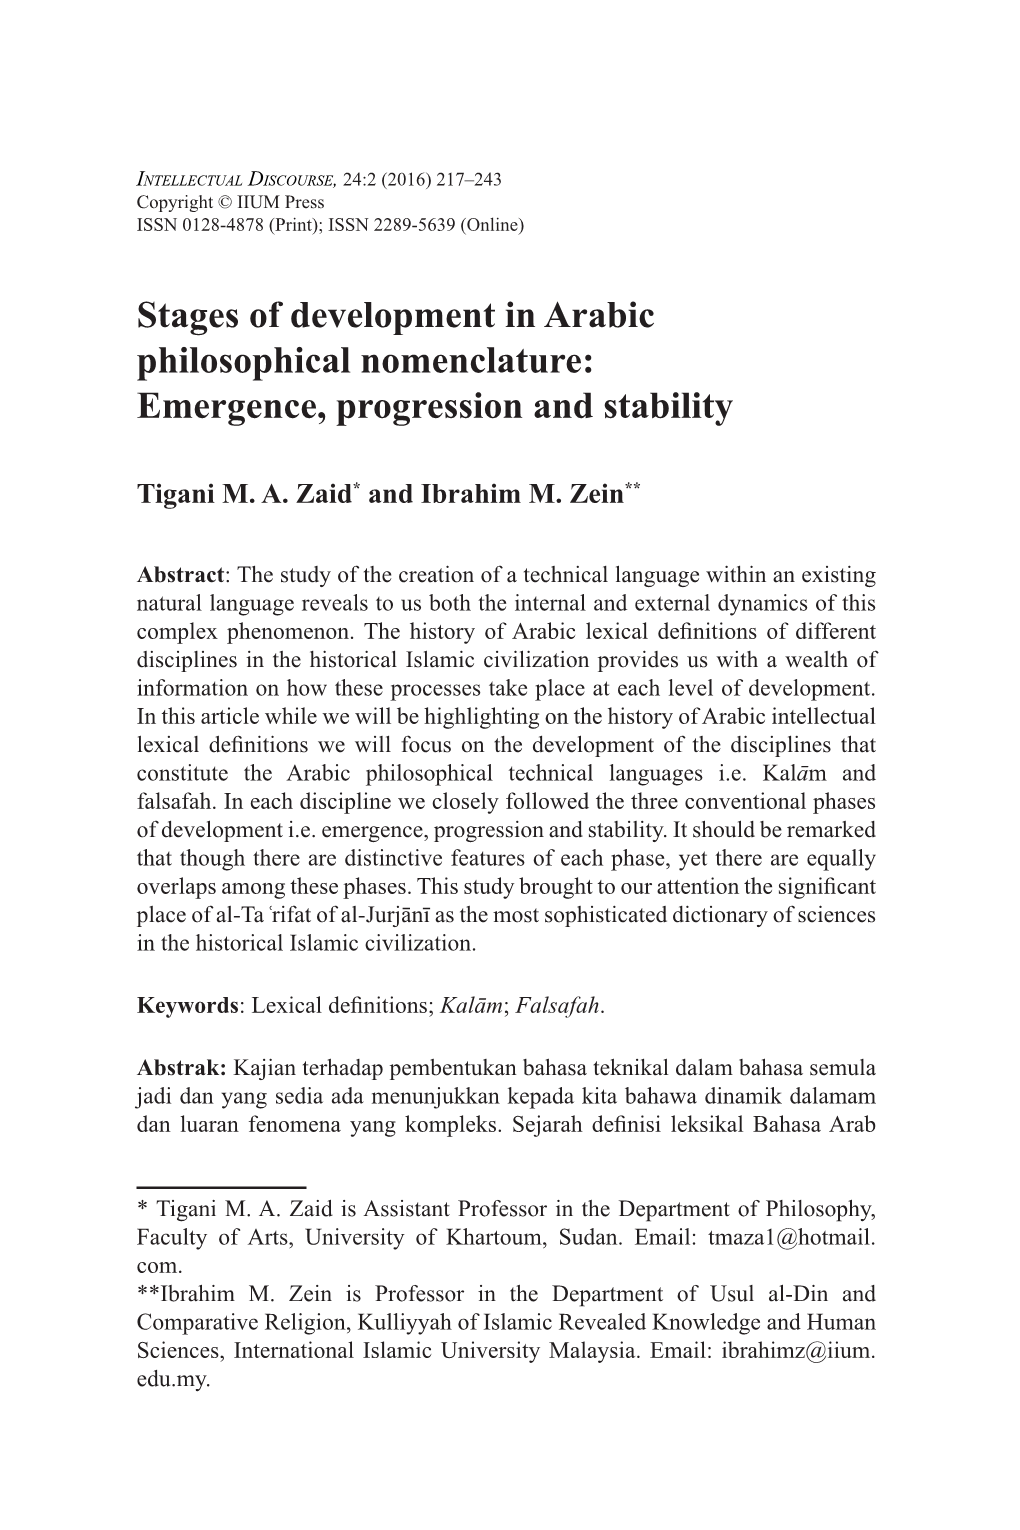 Stages of Development in Arabic Philosophical Nomenclature: Emergence, Progression and Stability